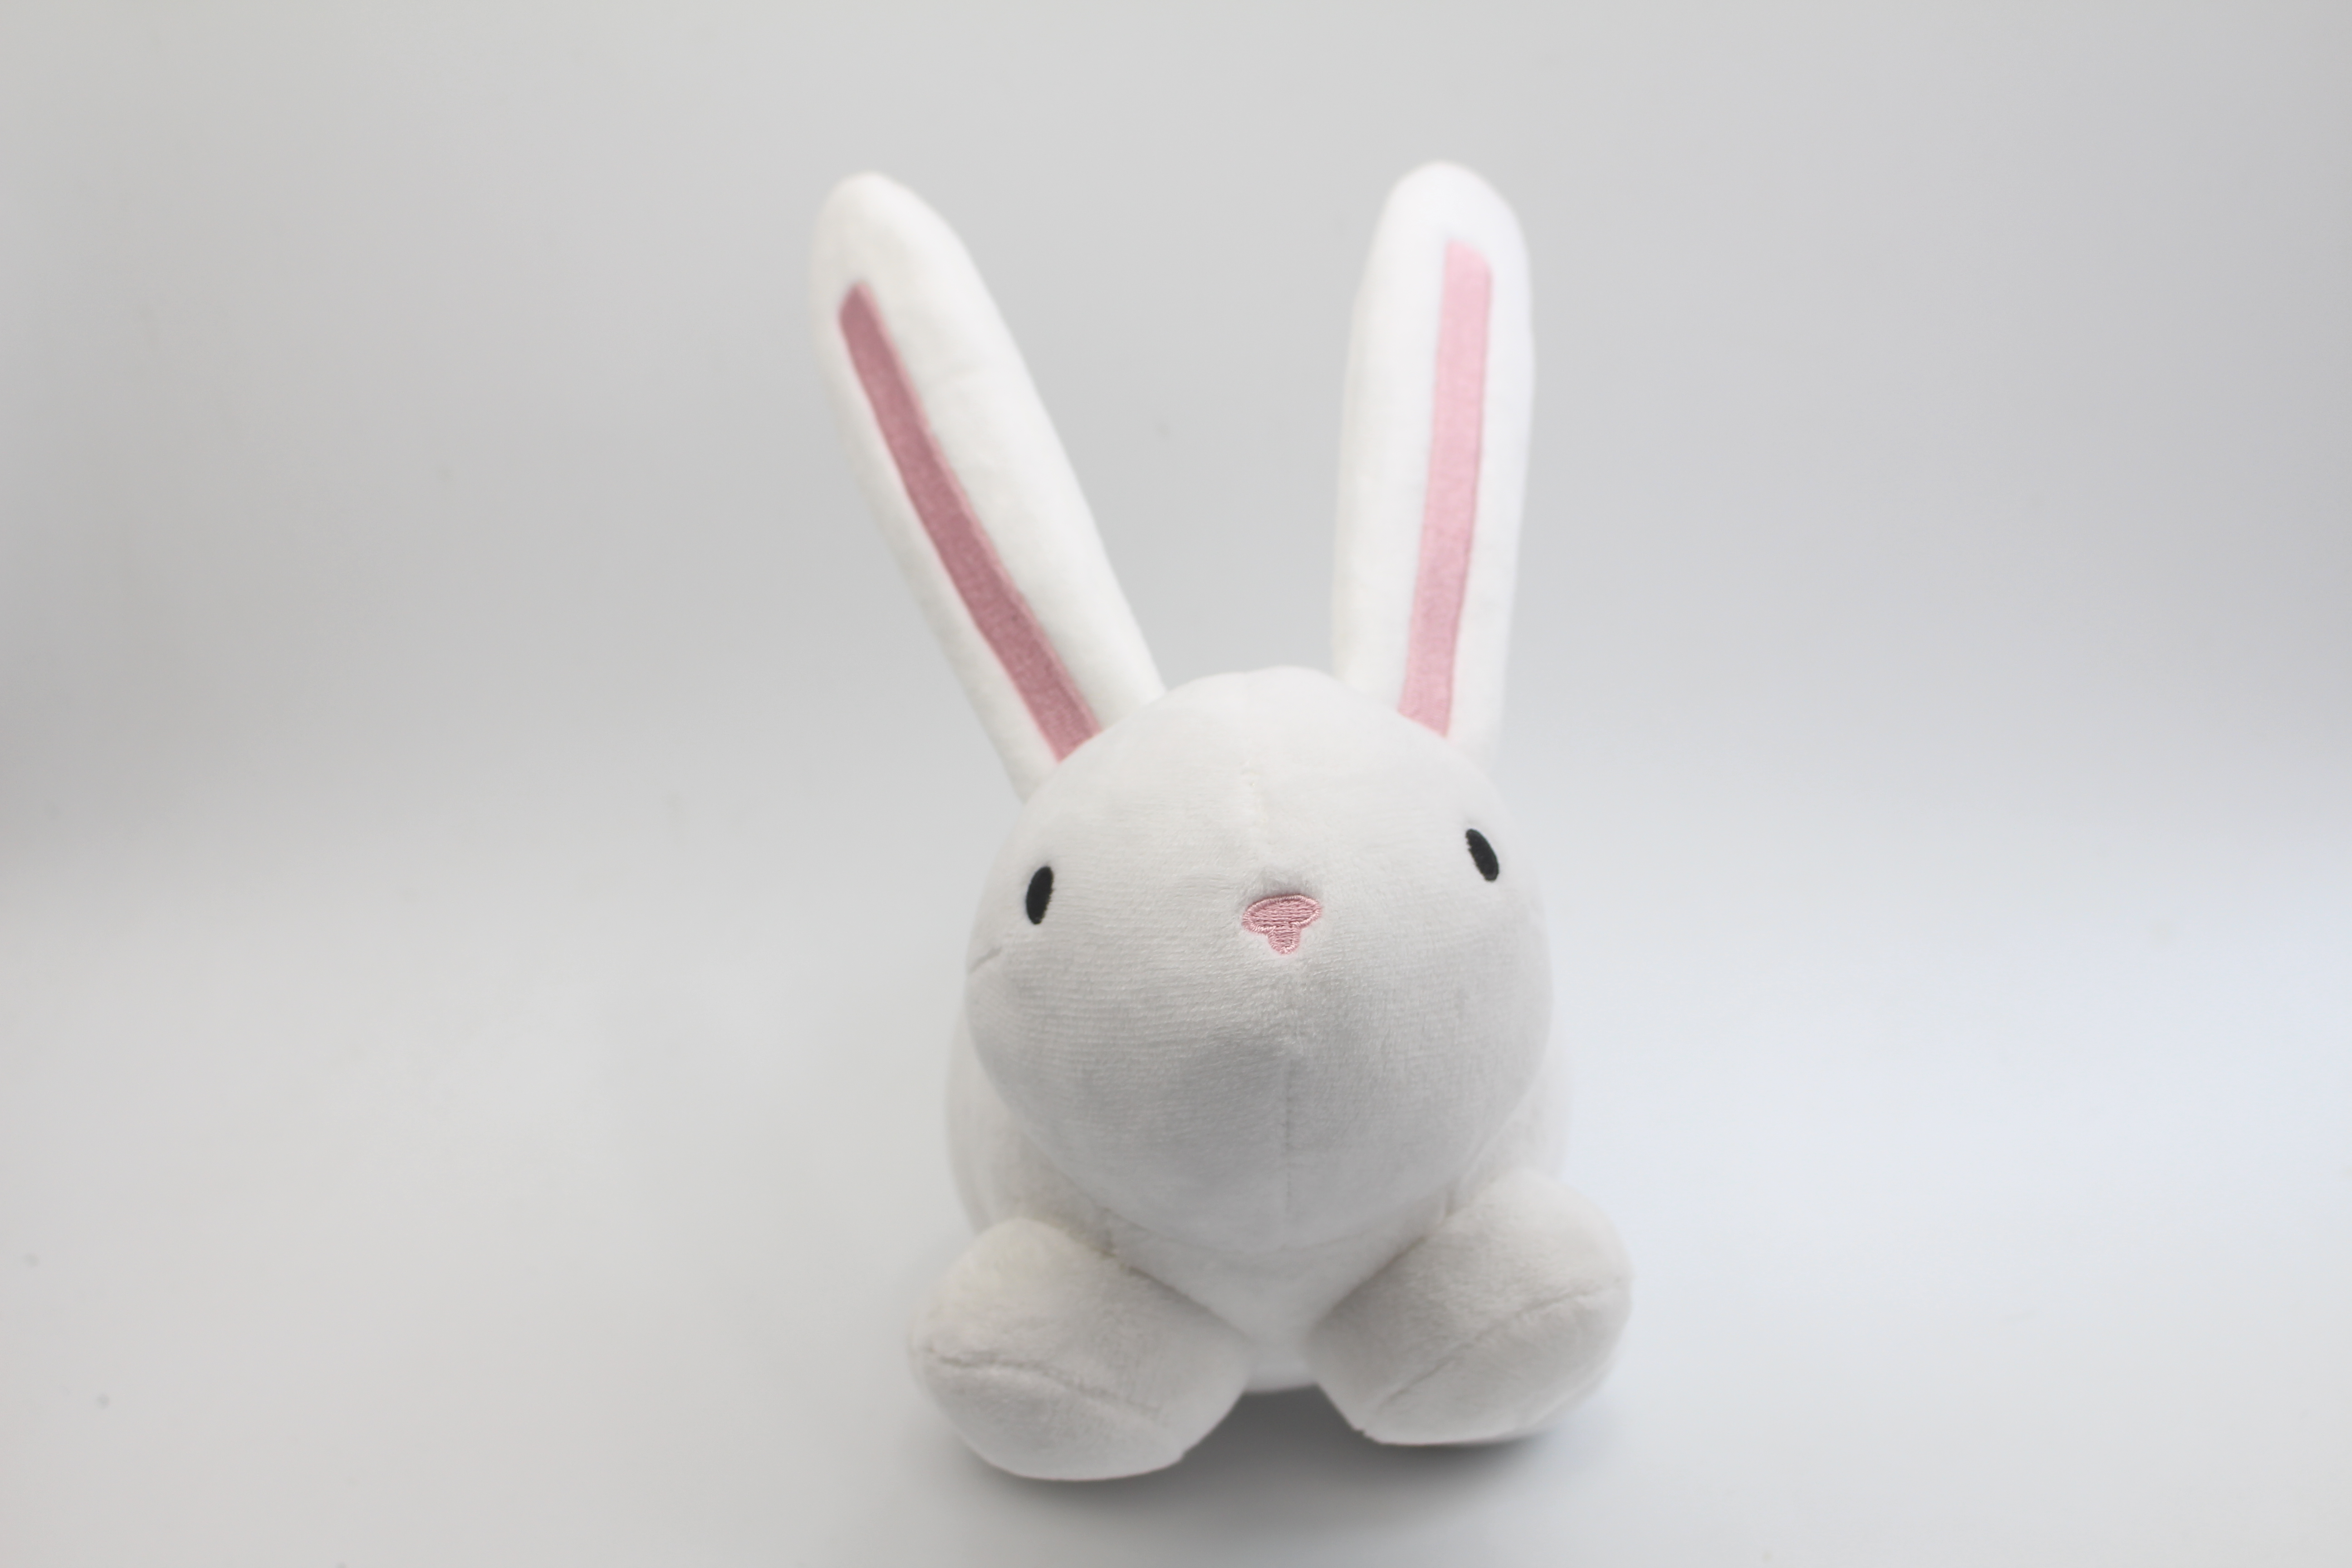 Front view of the bunny plushy